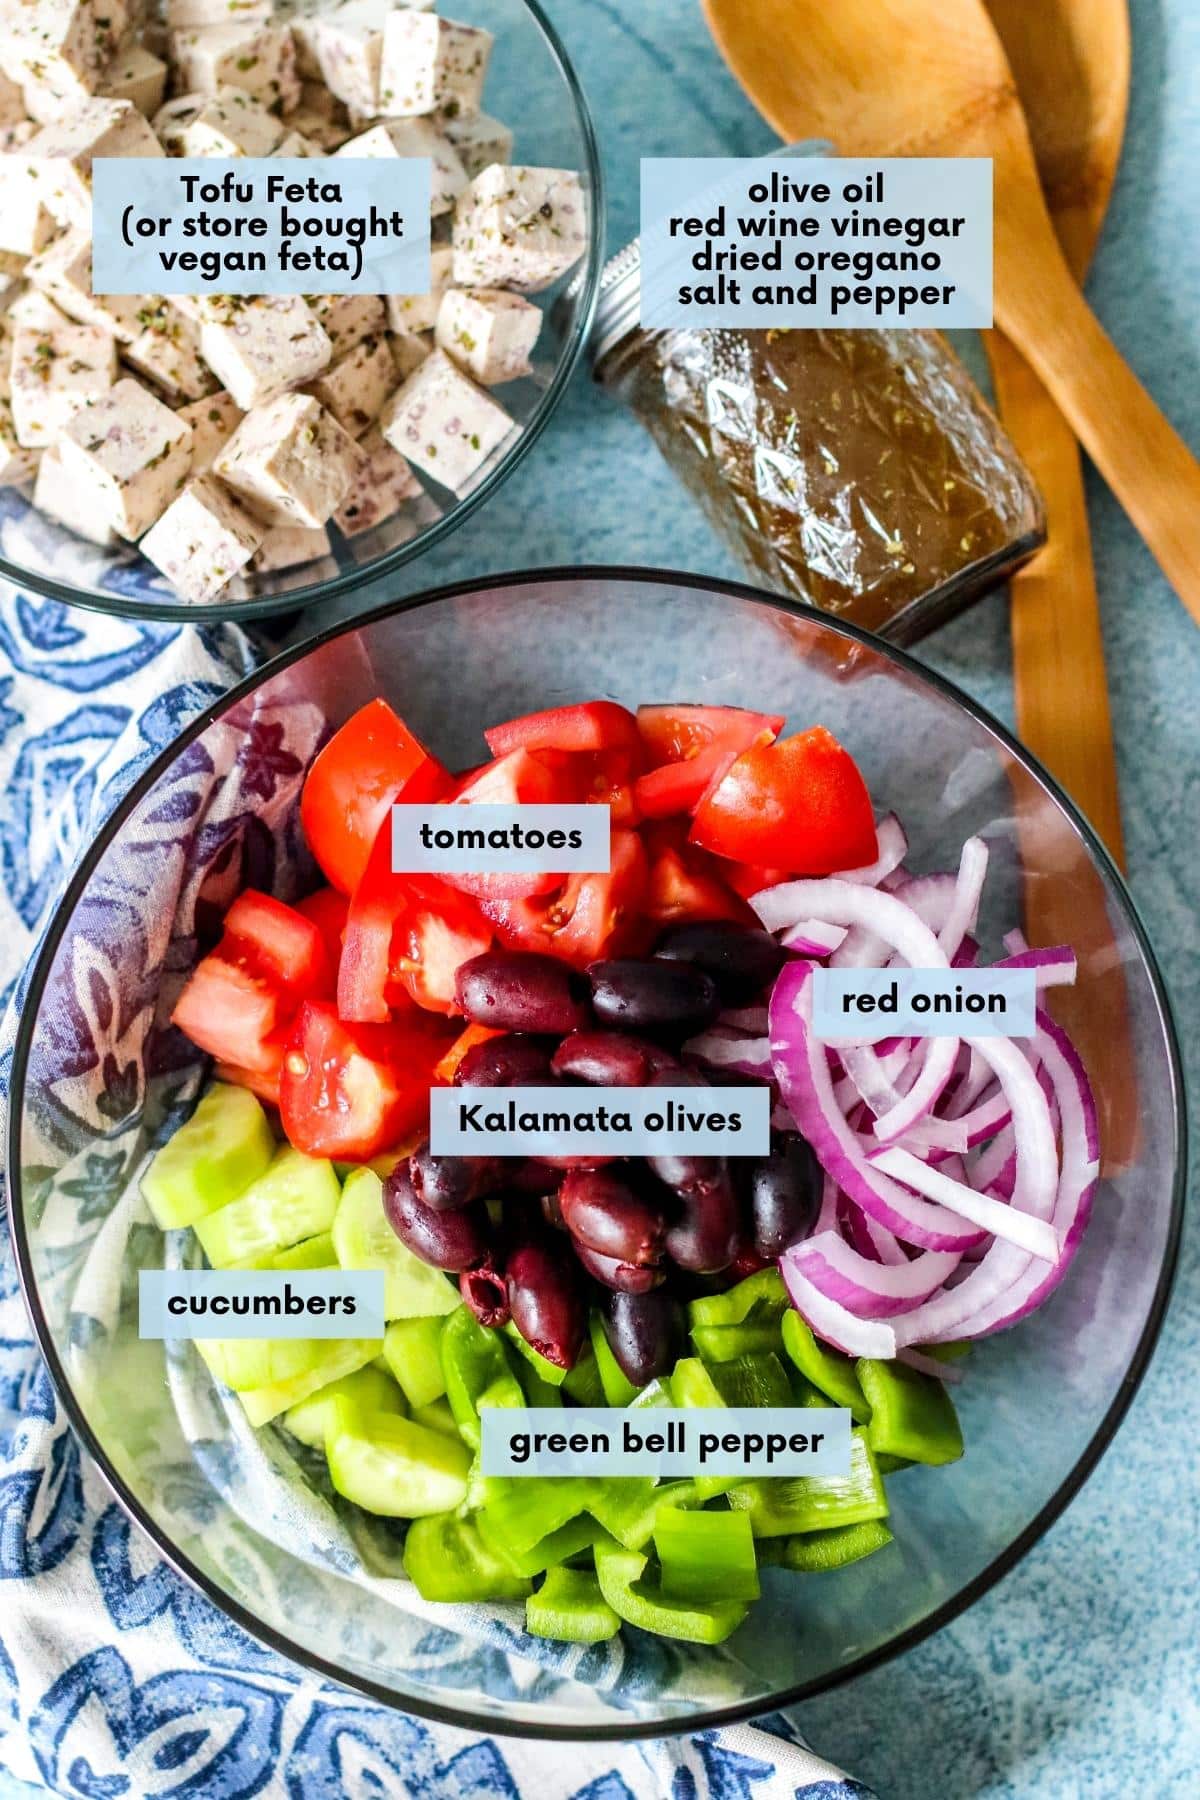 Large salad bowl with tomatoes, cucumbers, green bell peppers, red onions, and Kalamata olives, small bowl of vegan feta cheese, small jar of dressing, and salad tongs.